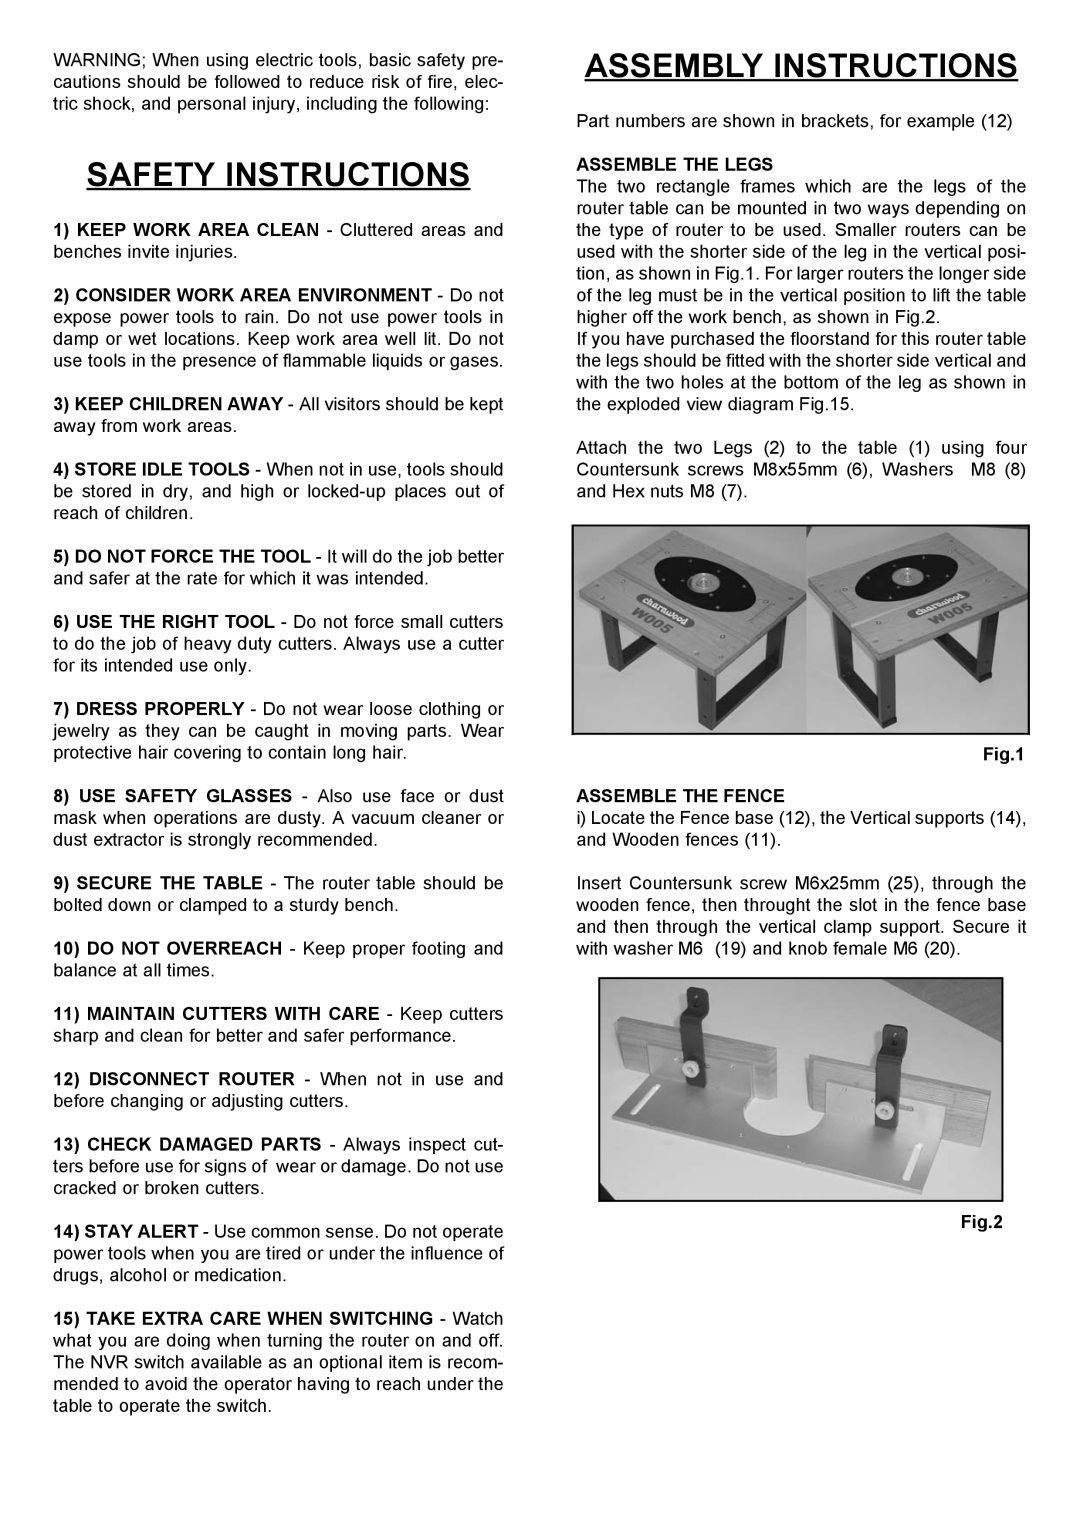 Charnwood W013 operating instructions Safety Instructions, Assembly Instructions, Assemble The Legs, Assemble The Fence 